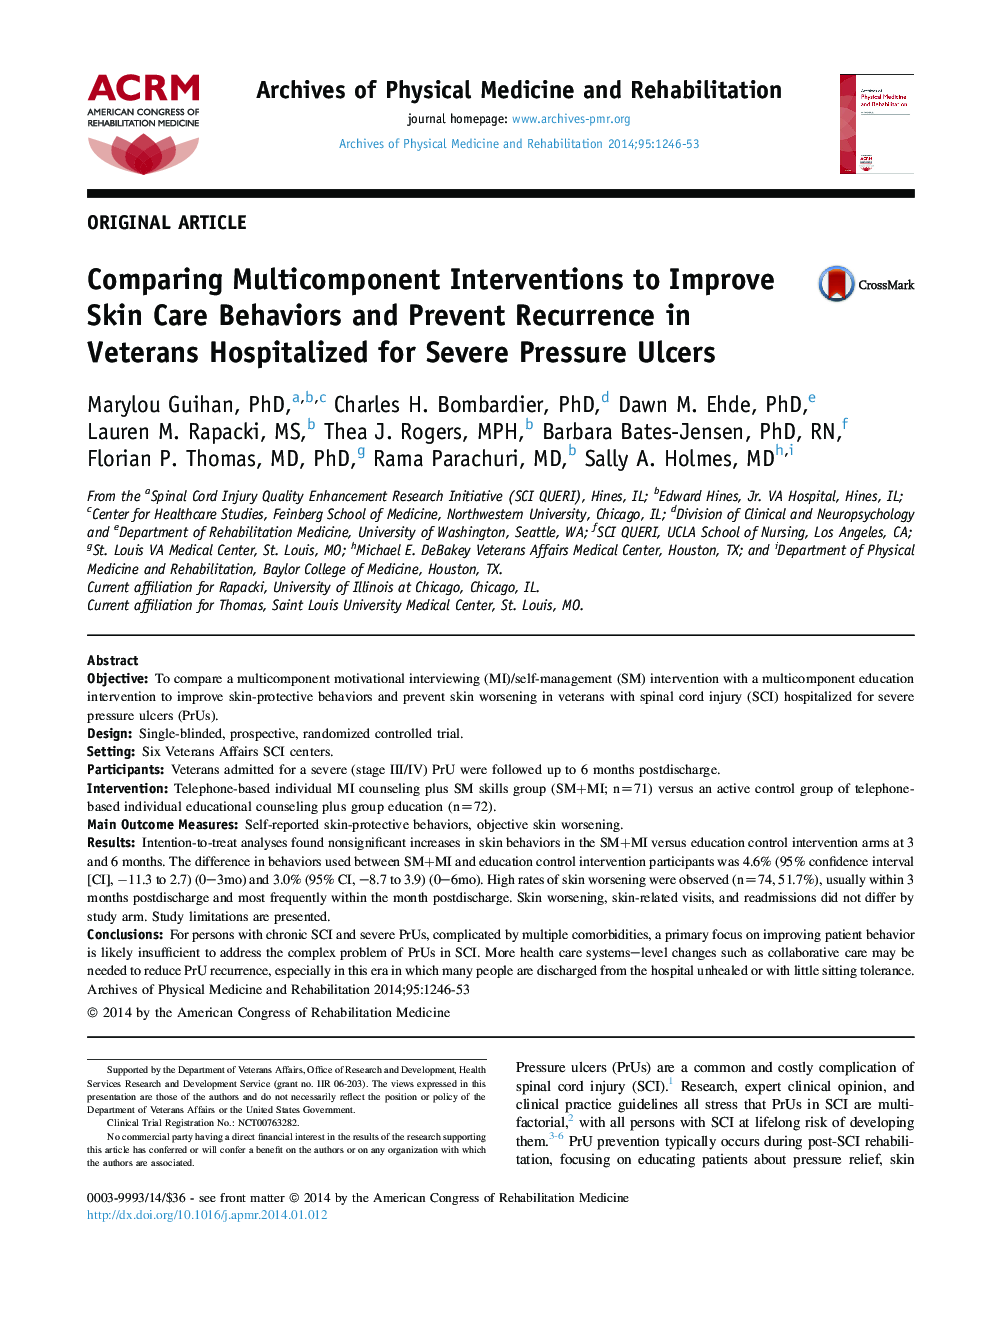 Comparing Multicomponent Interventions to Improve Skin Care Behaviors and Prevent Recurrence in Veterans Hospitalized for Severe Pressure Ulcers